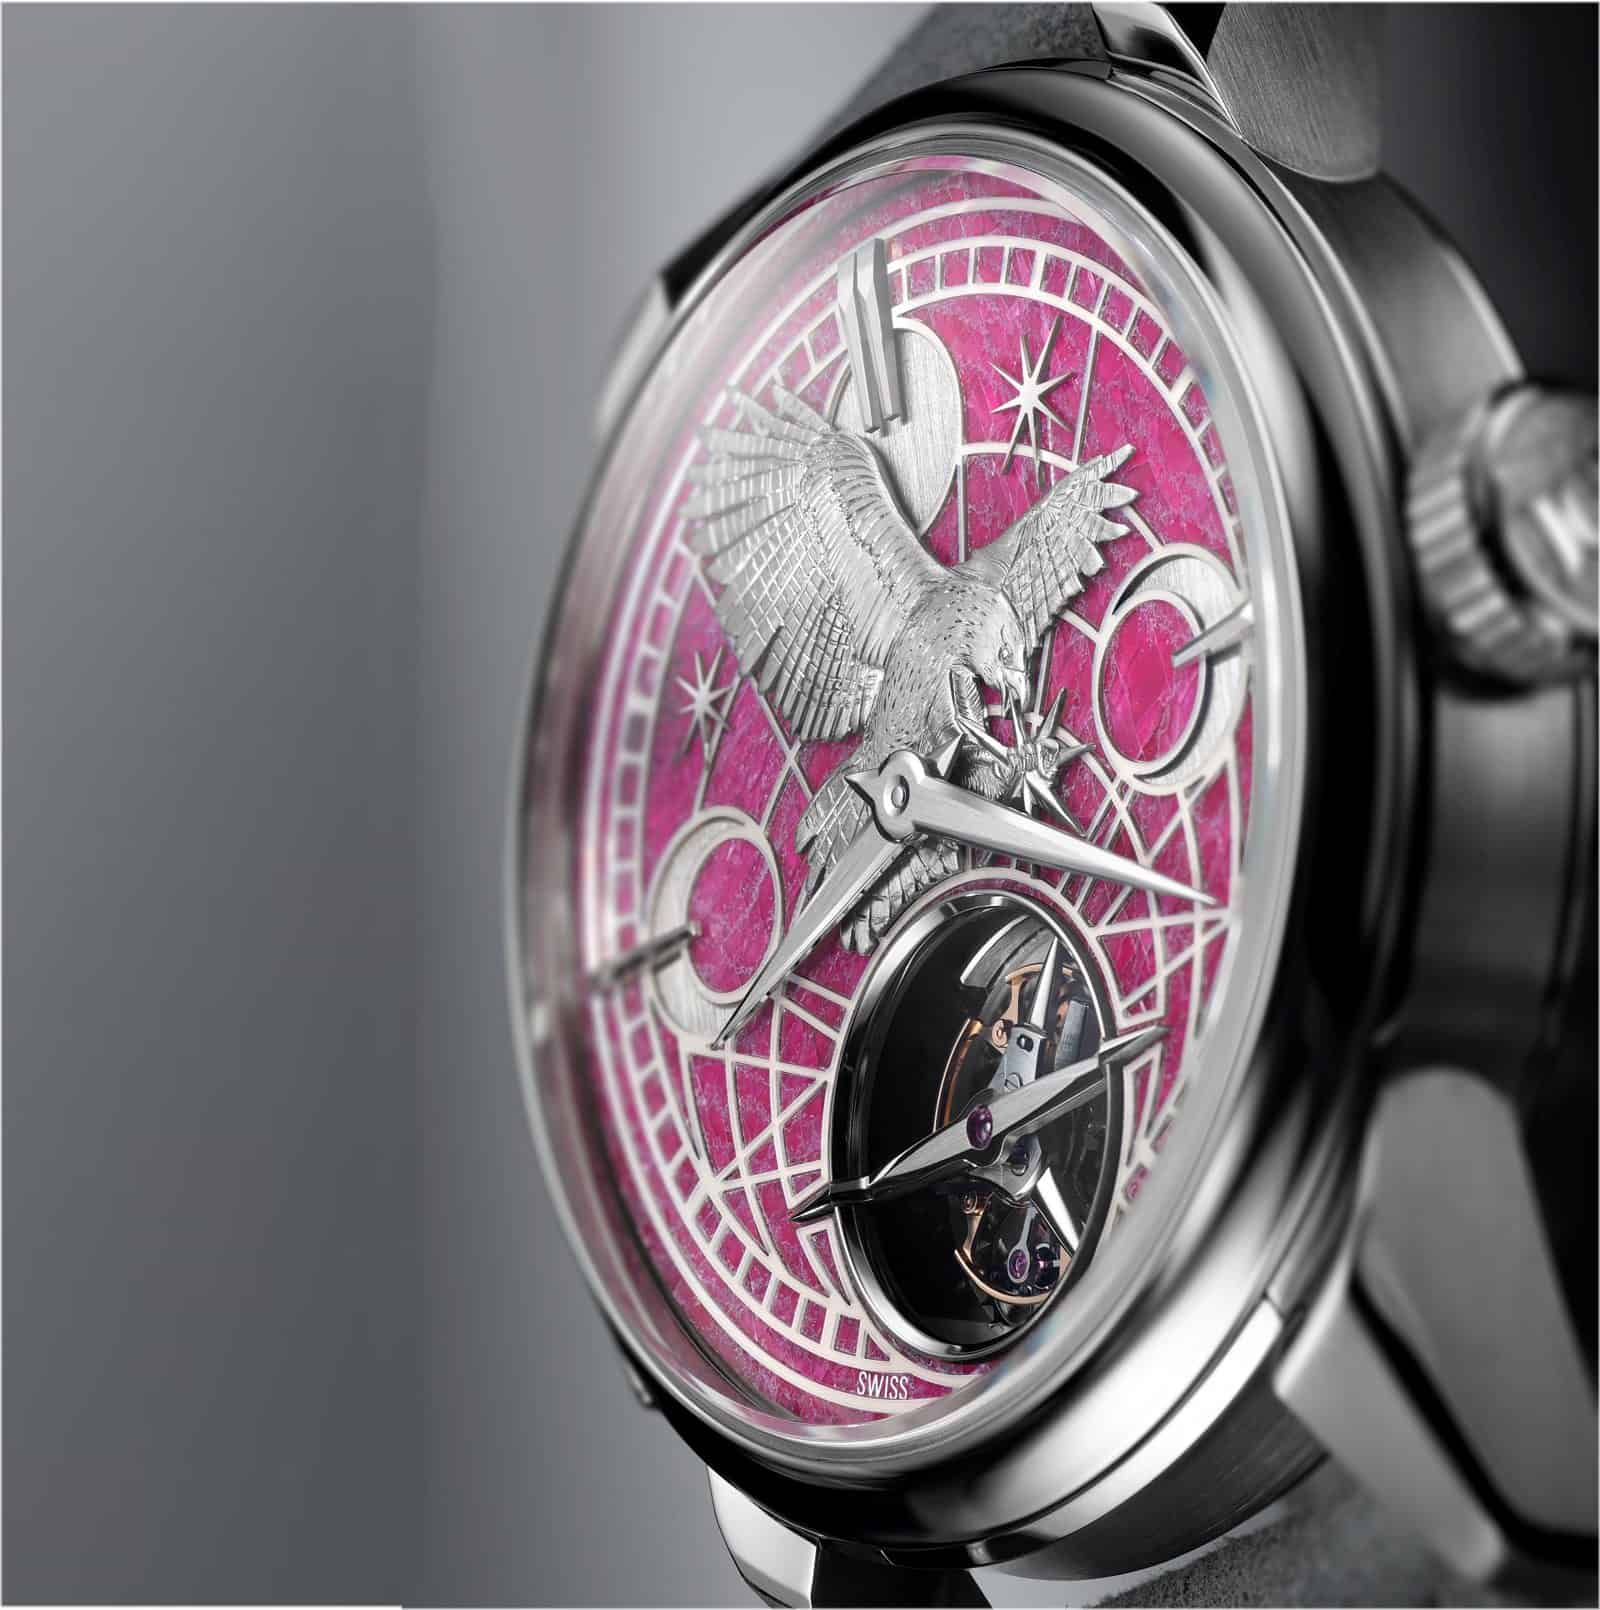 Biver Watch Hommage to Katar Minute Repeater Carillon Tourbillon